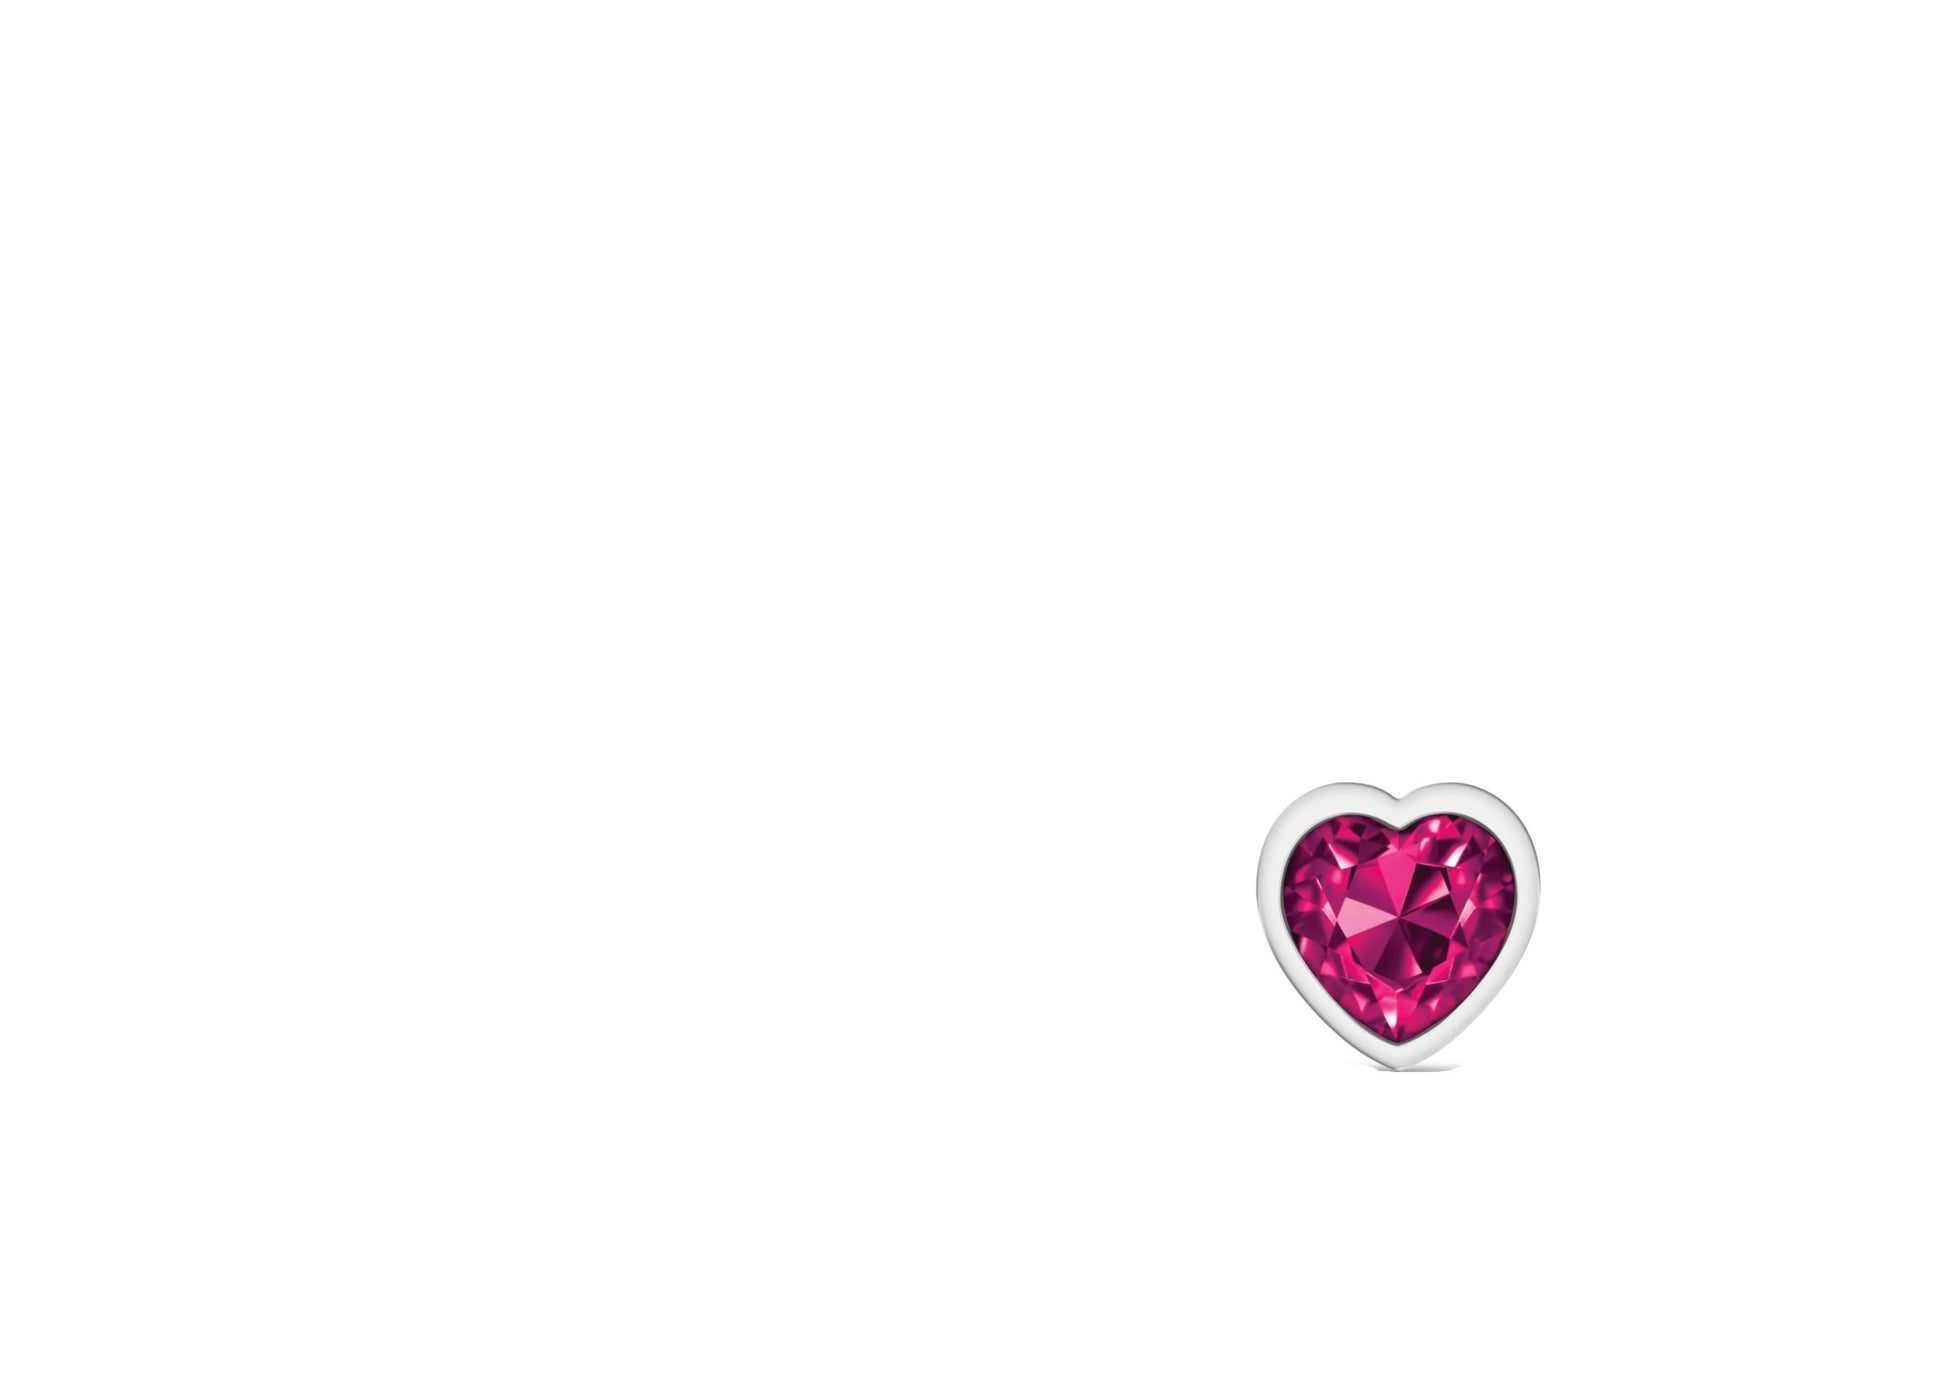 cheeky charms silver metal butt plug heart bright pink large